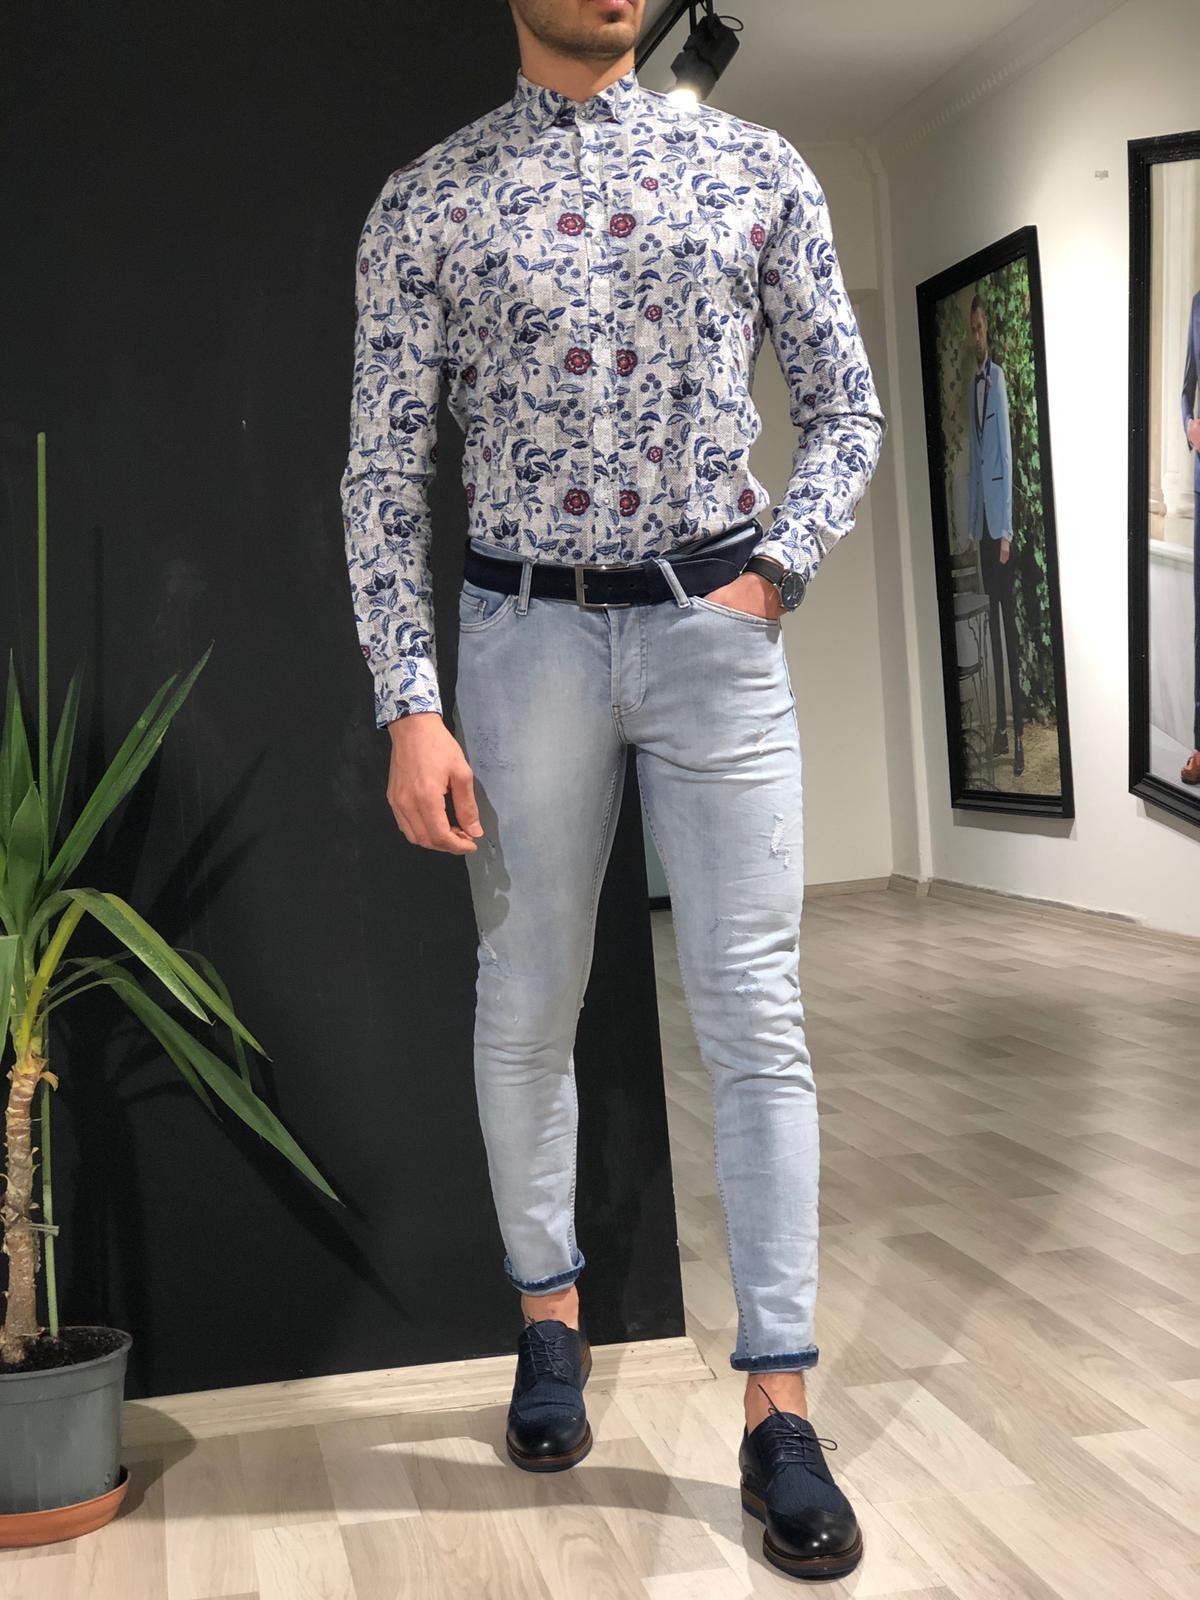 Buy White Slim Fit Floral Shirt by Gentwith.com with Free Shipping